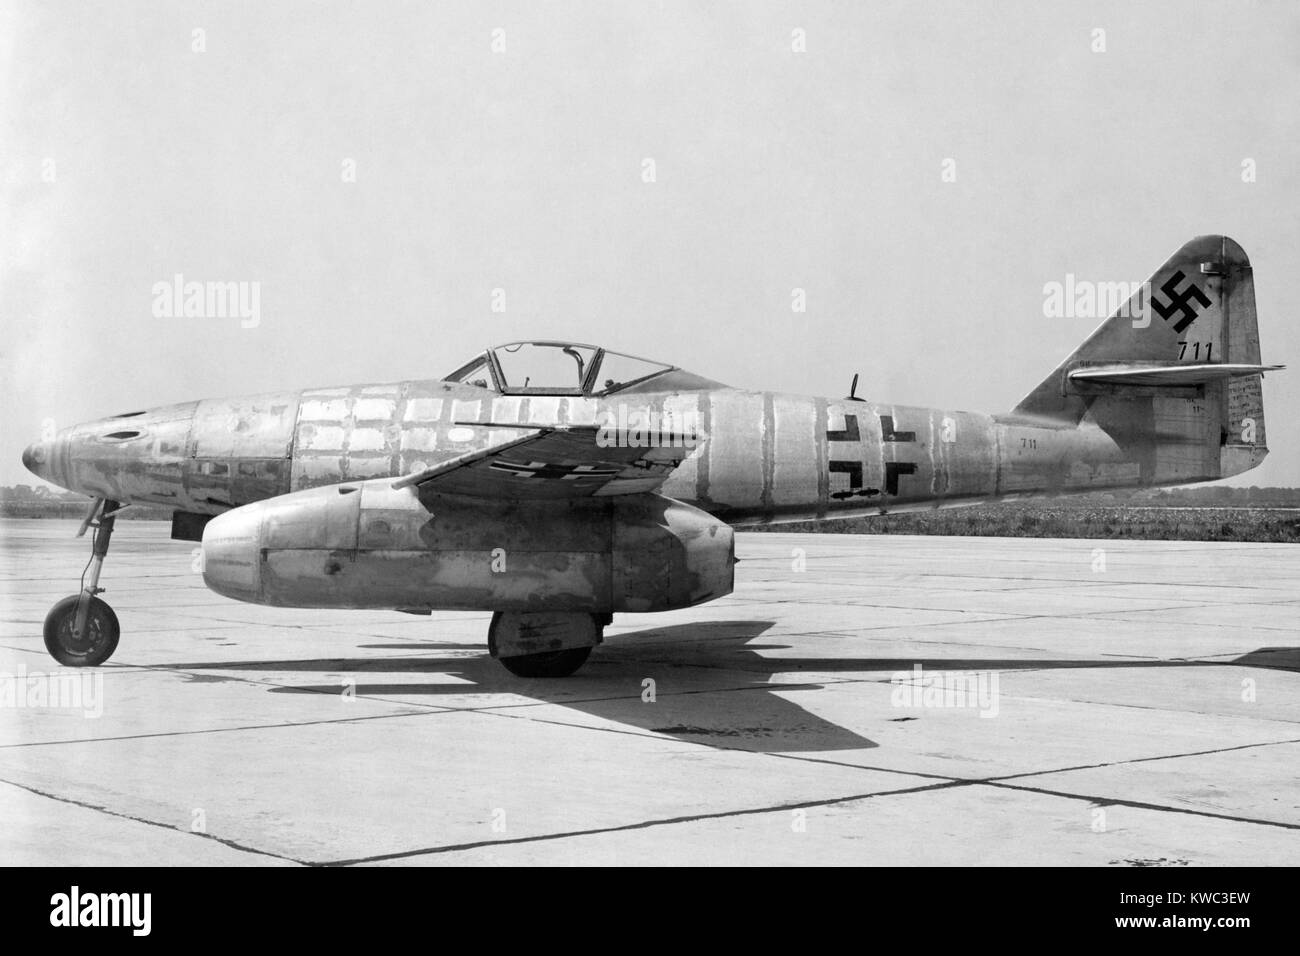 German Messerschmitt 262 jet-propelled plane in possession of the U.S. Air Force after World War 2. Side view. 1945. (BSLOC 2015 13 73) Stock Photo